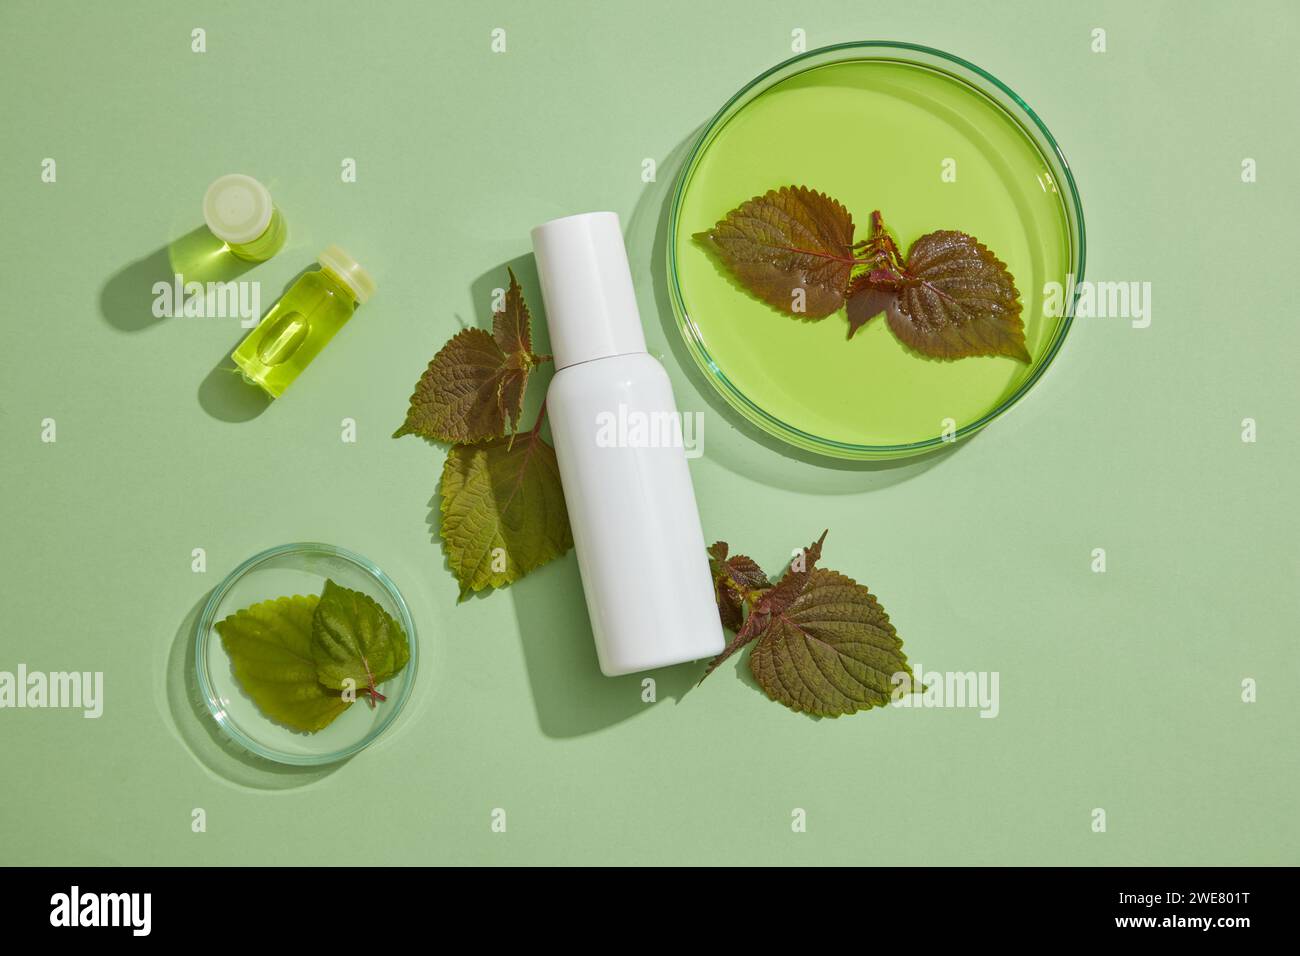 Glass jars and petri dishes containing yellow essential oil. Bottle for branding mockup featured. Beefsteak Plant (Perilla frutescens) is an ancient m Stock Photo